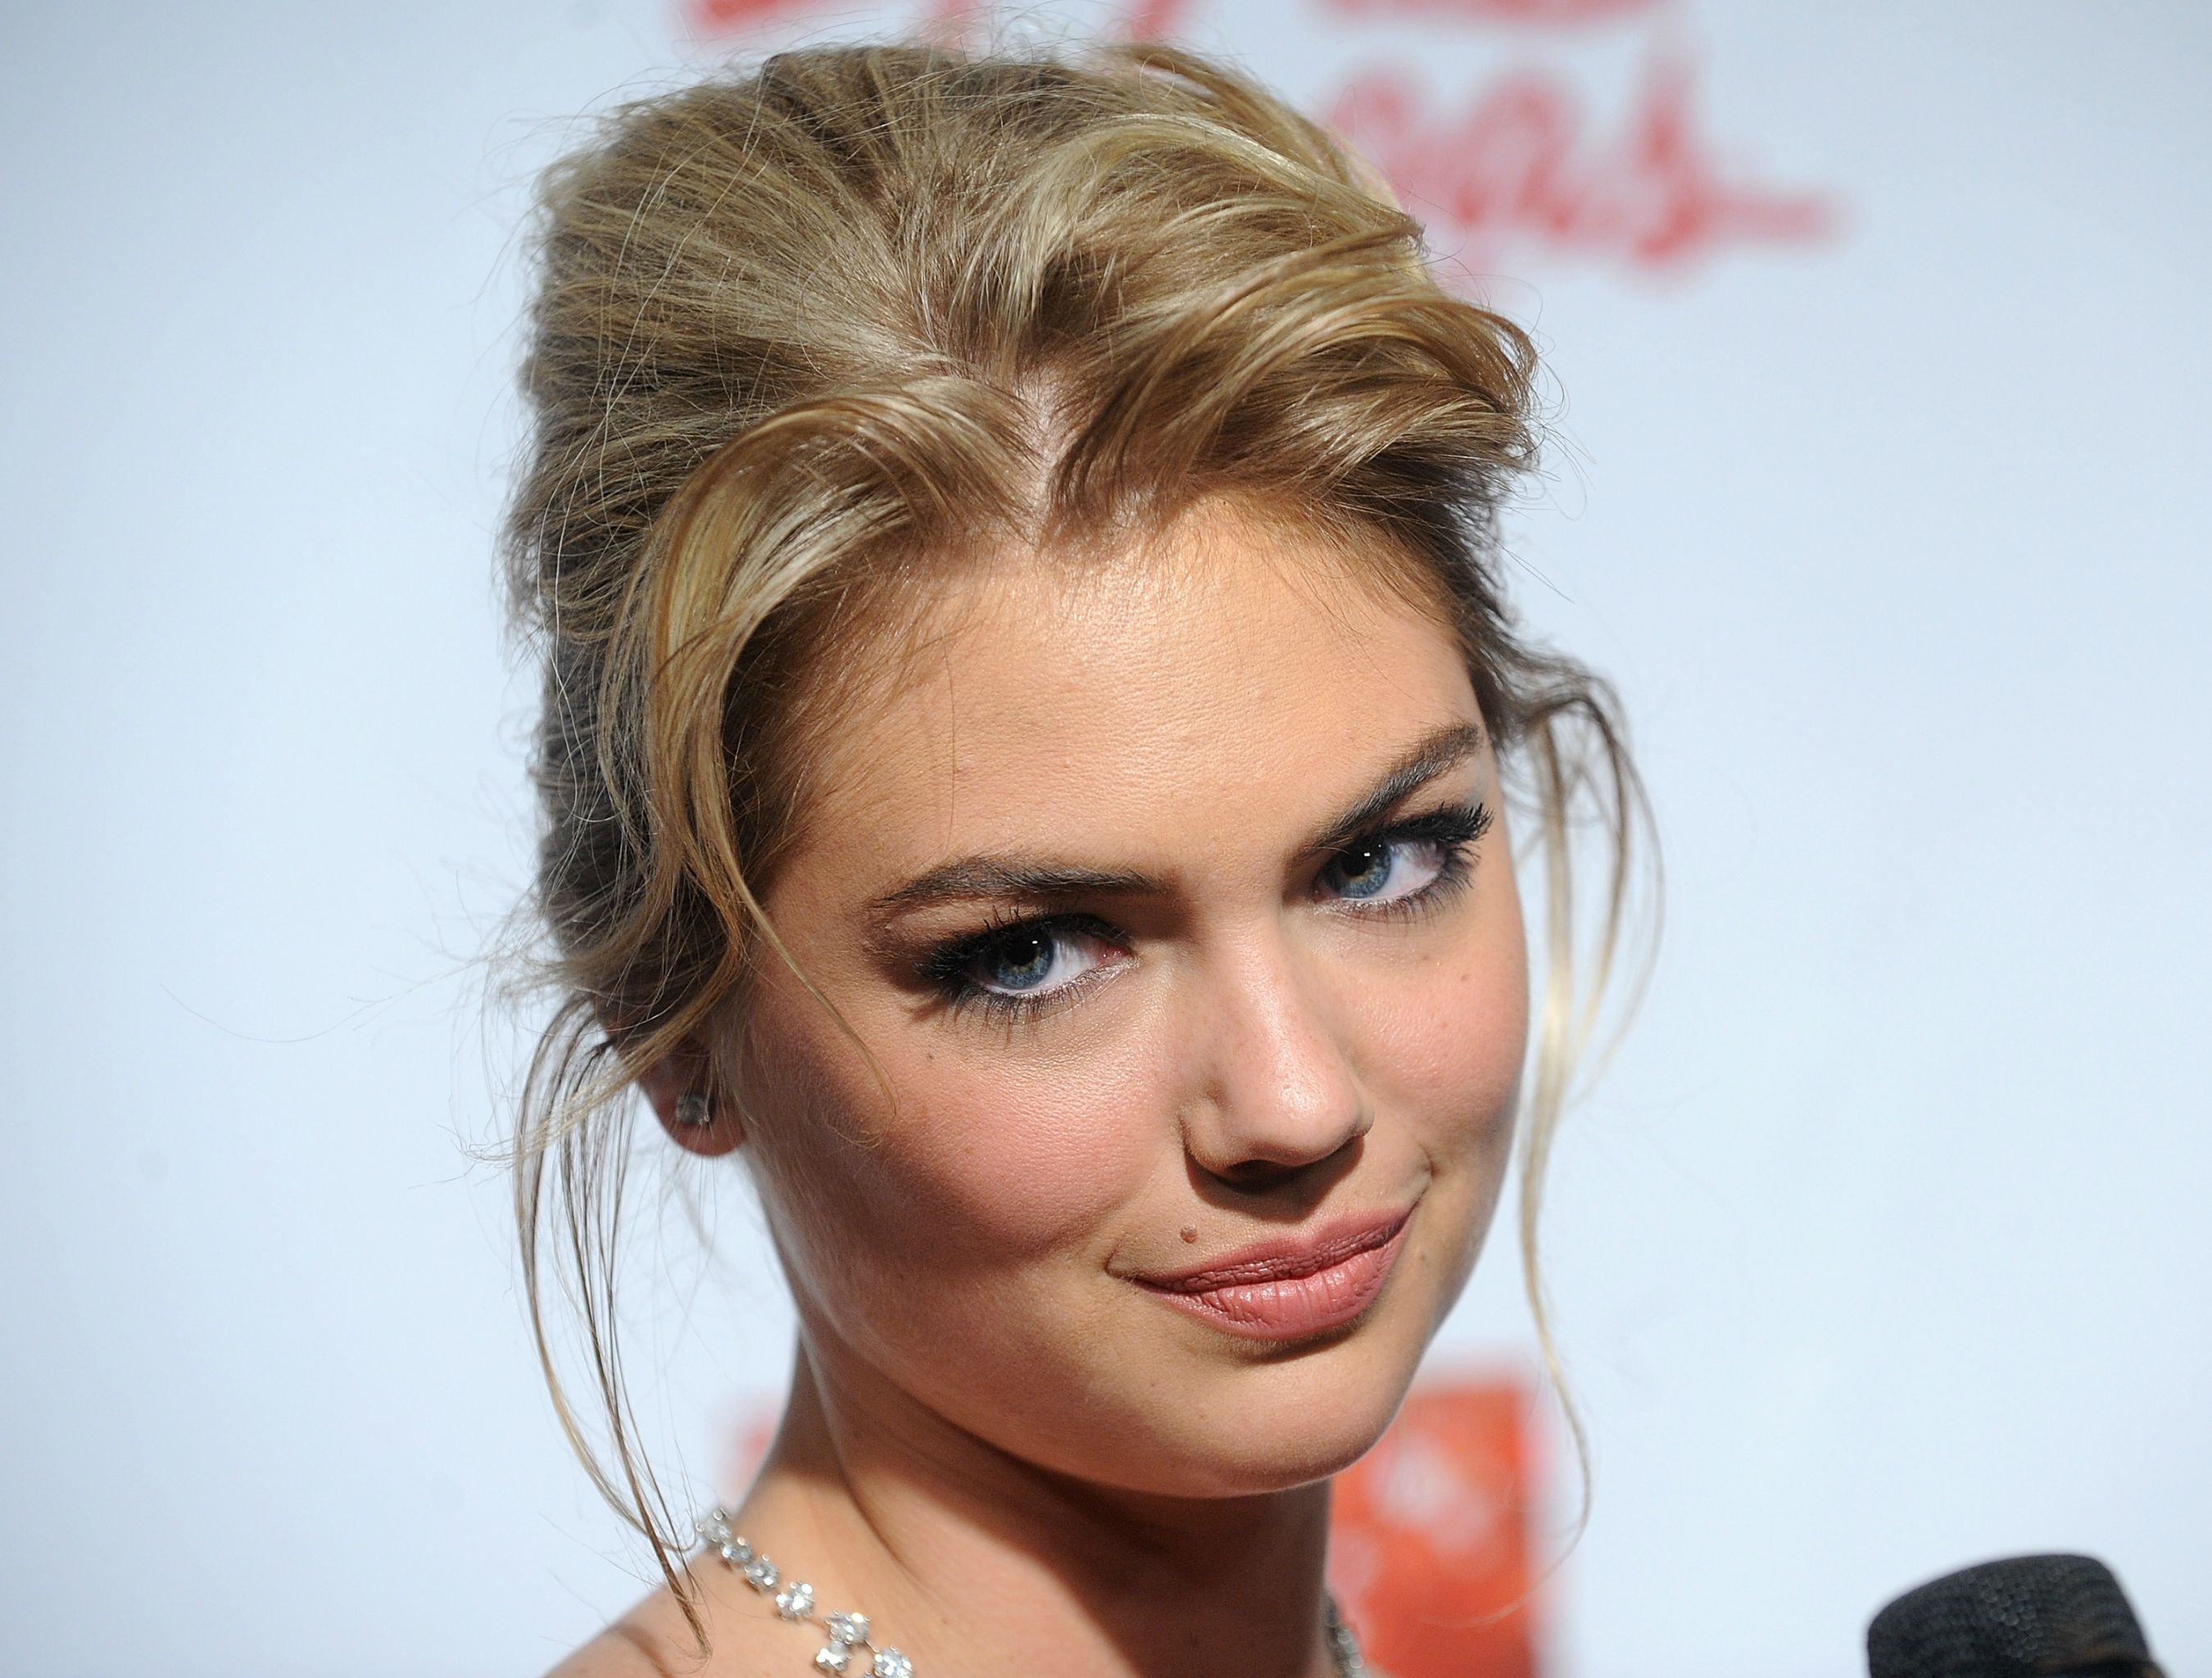 Best Of Kate Upton Wallpaper That Are Too Hot To Handle